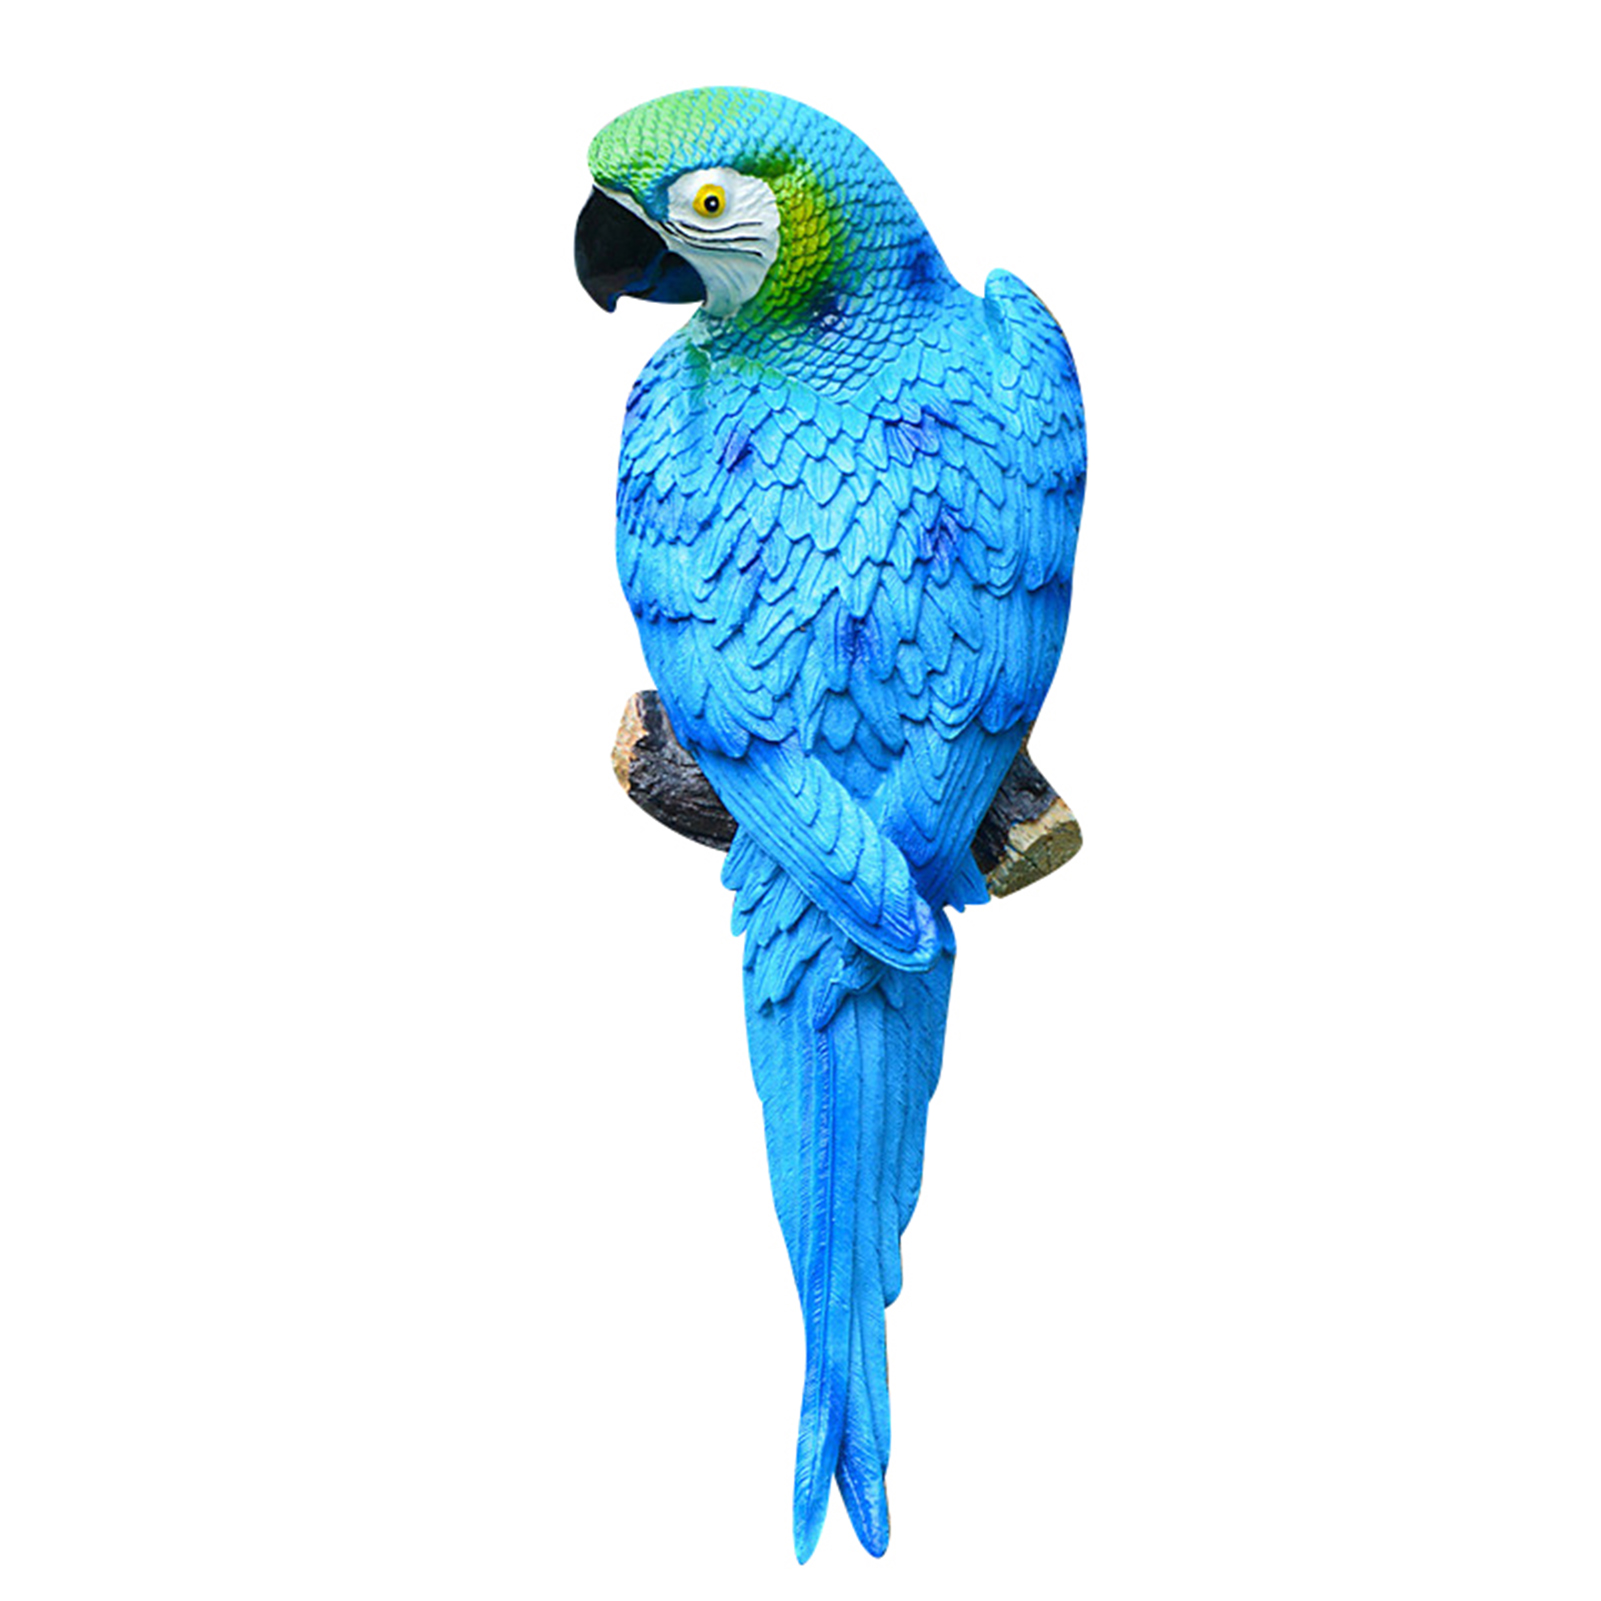 Realistic Hanging Parrots Statue for Home Decor